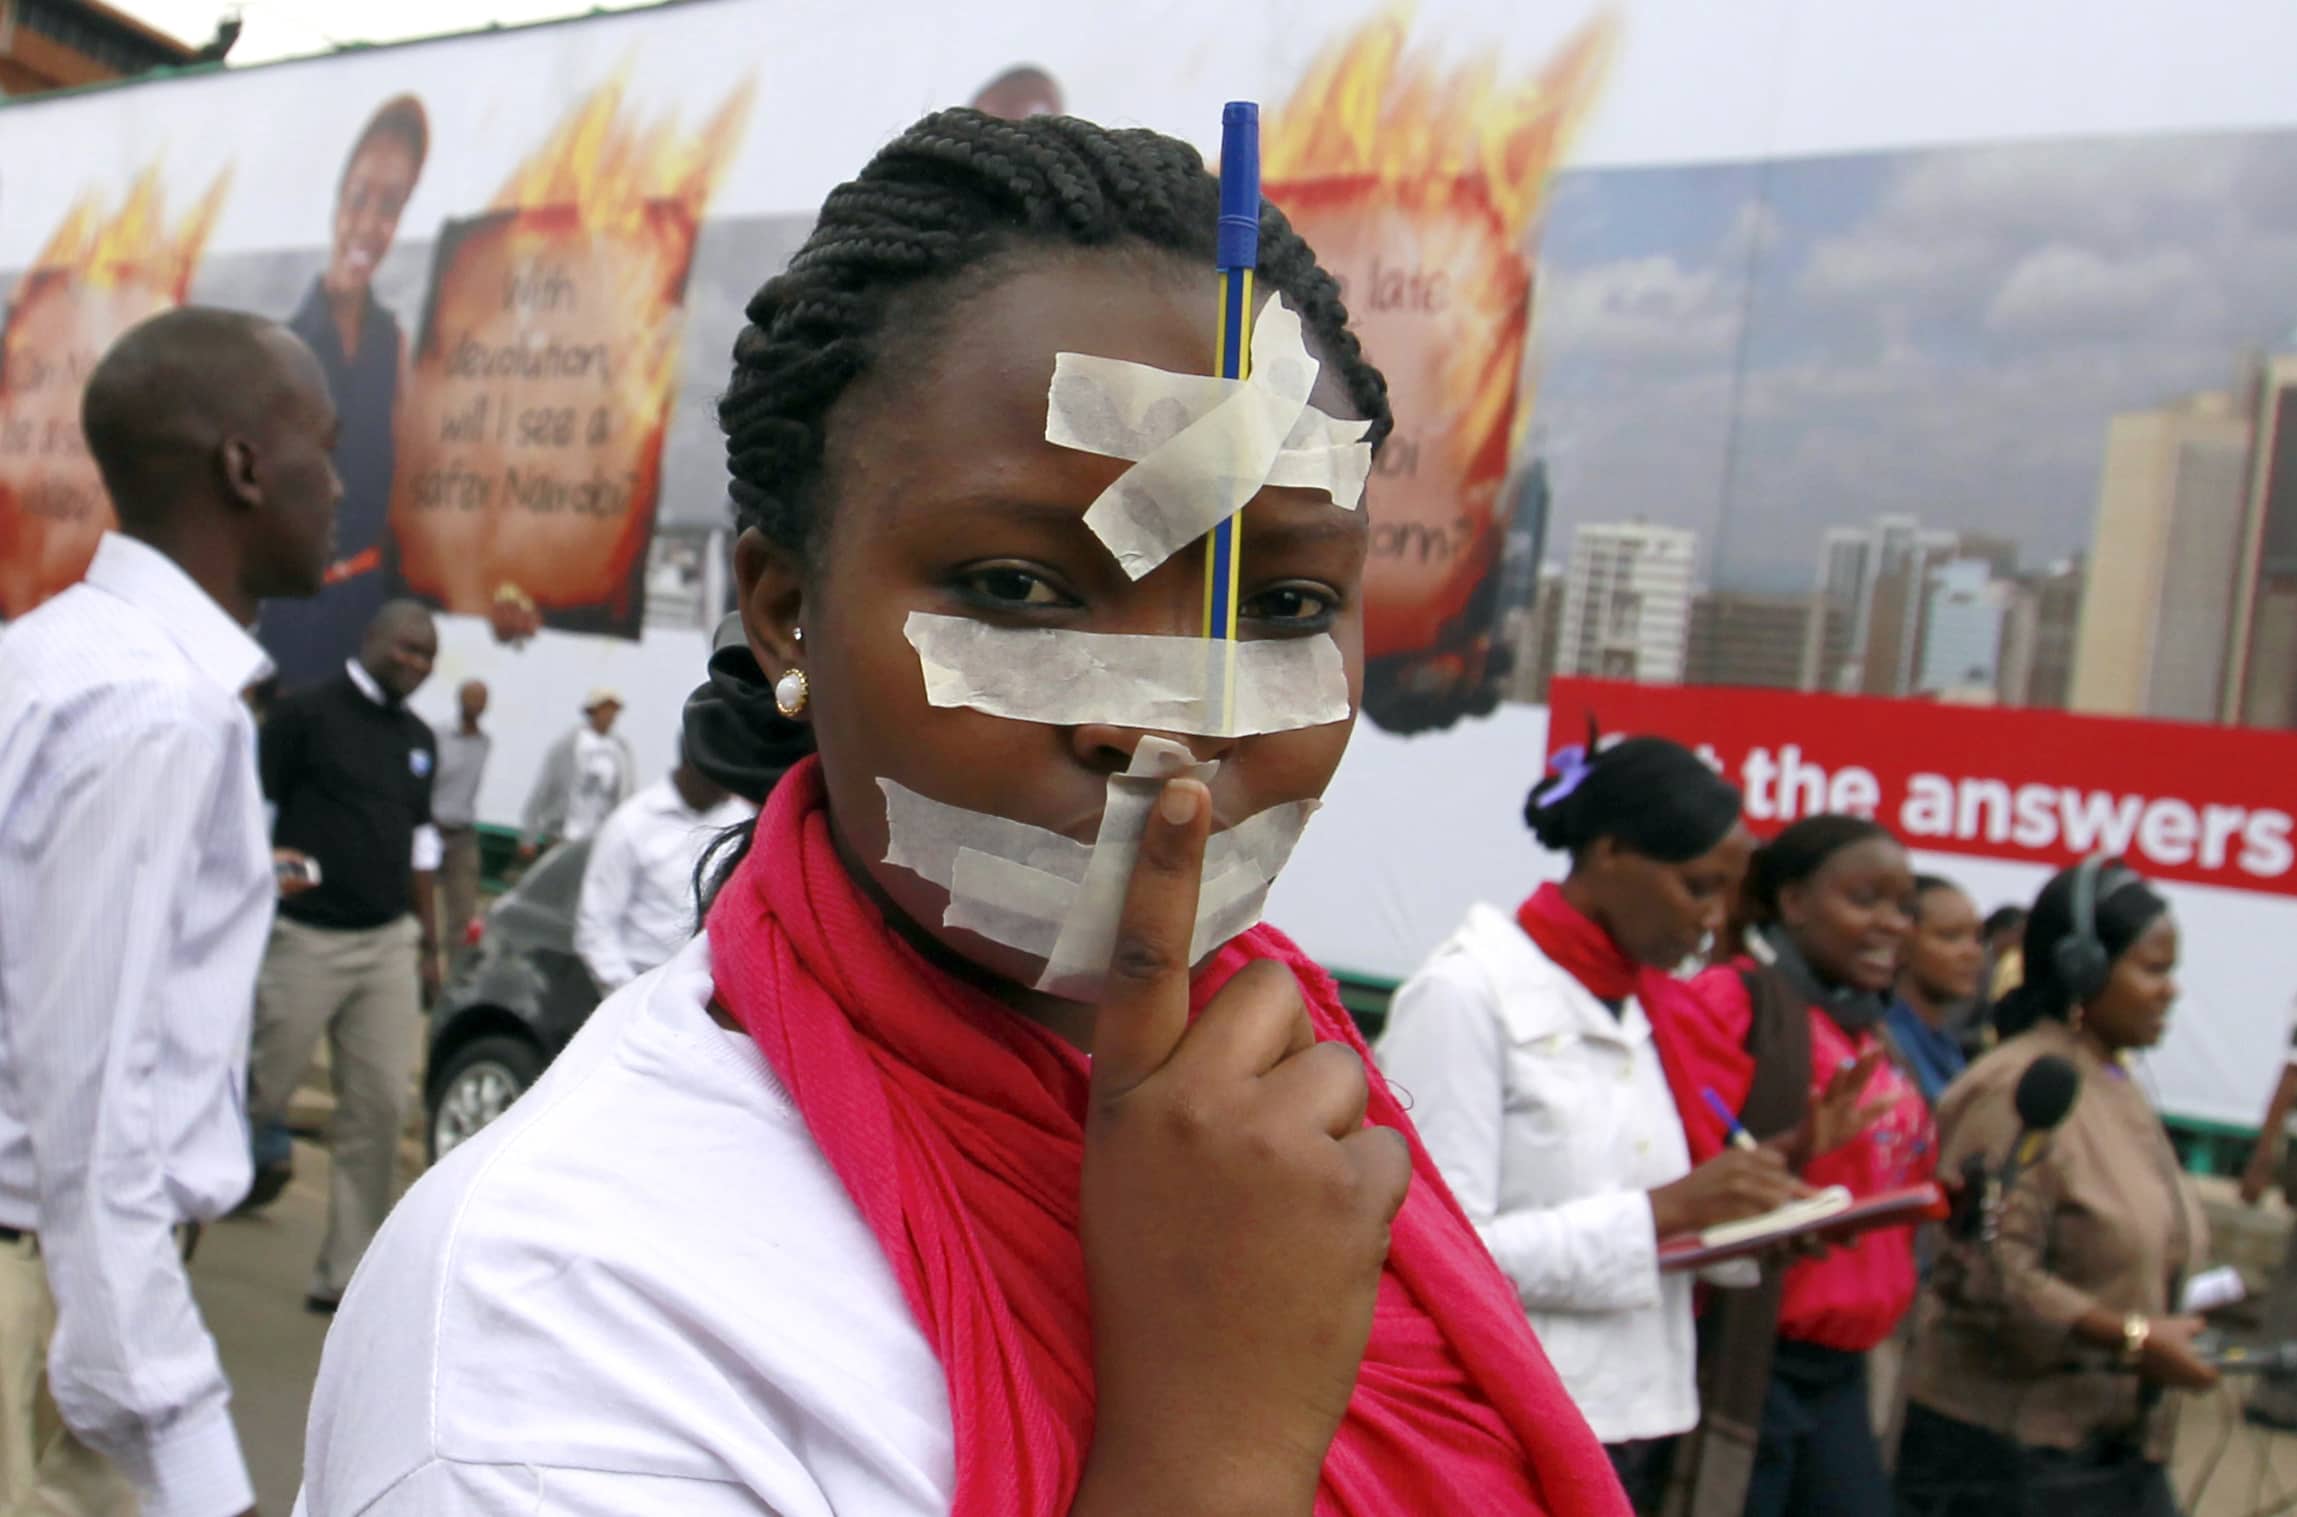 Kenyan Women Journalists Rank Among Most Targeted Online in Africa, Study Finds